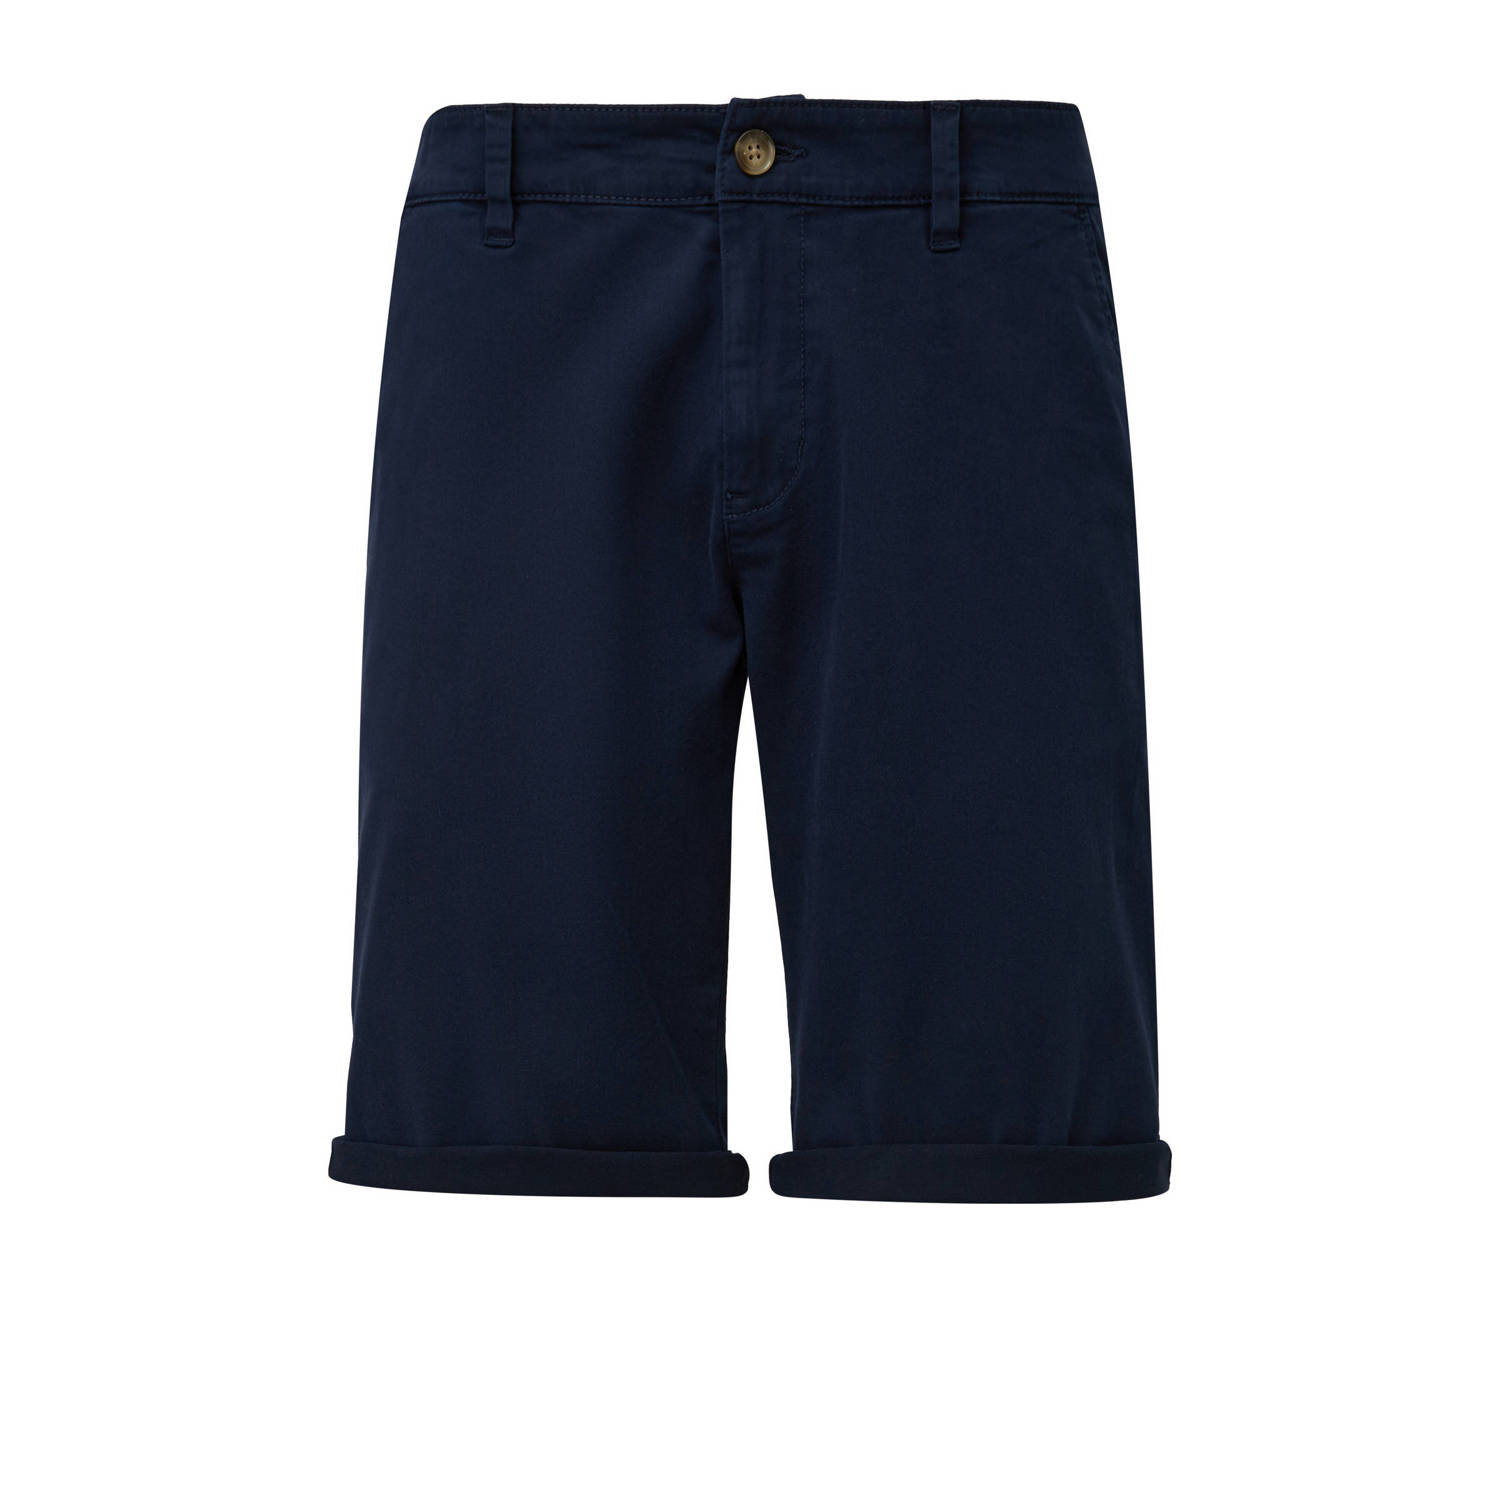 Q S by s.Oliver slim fit short